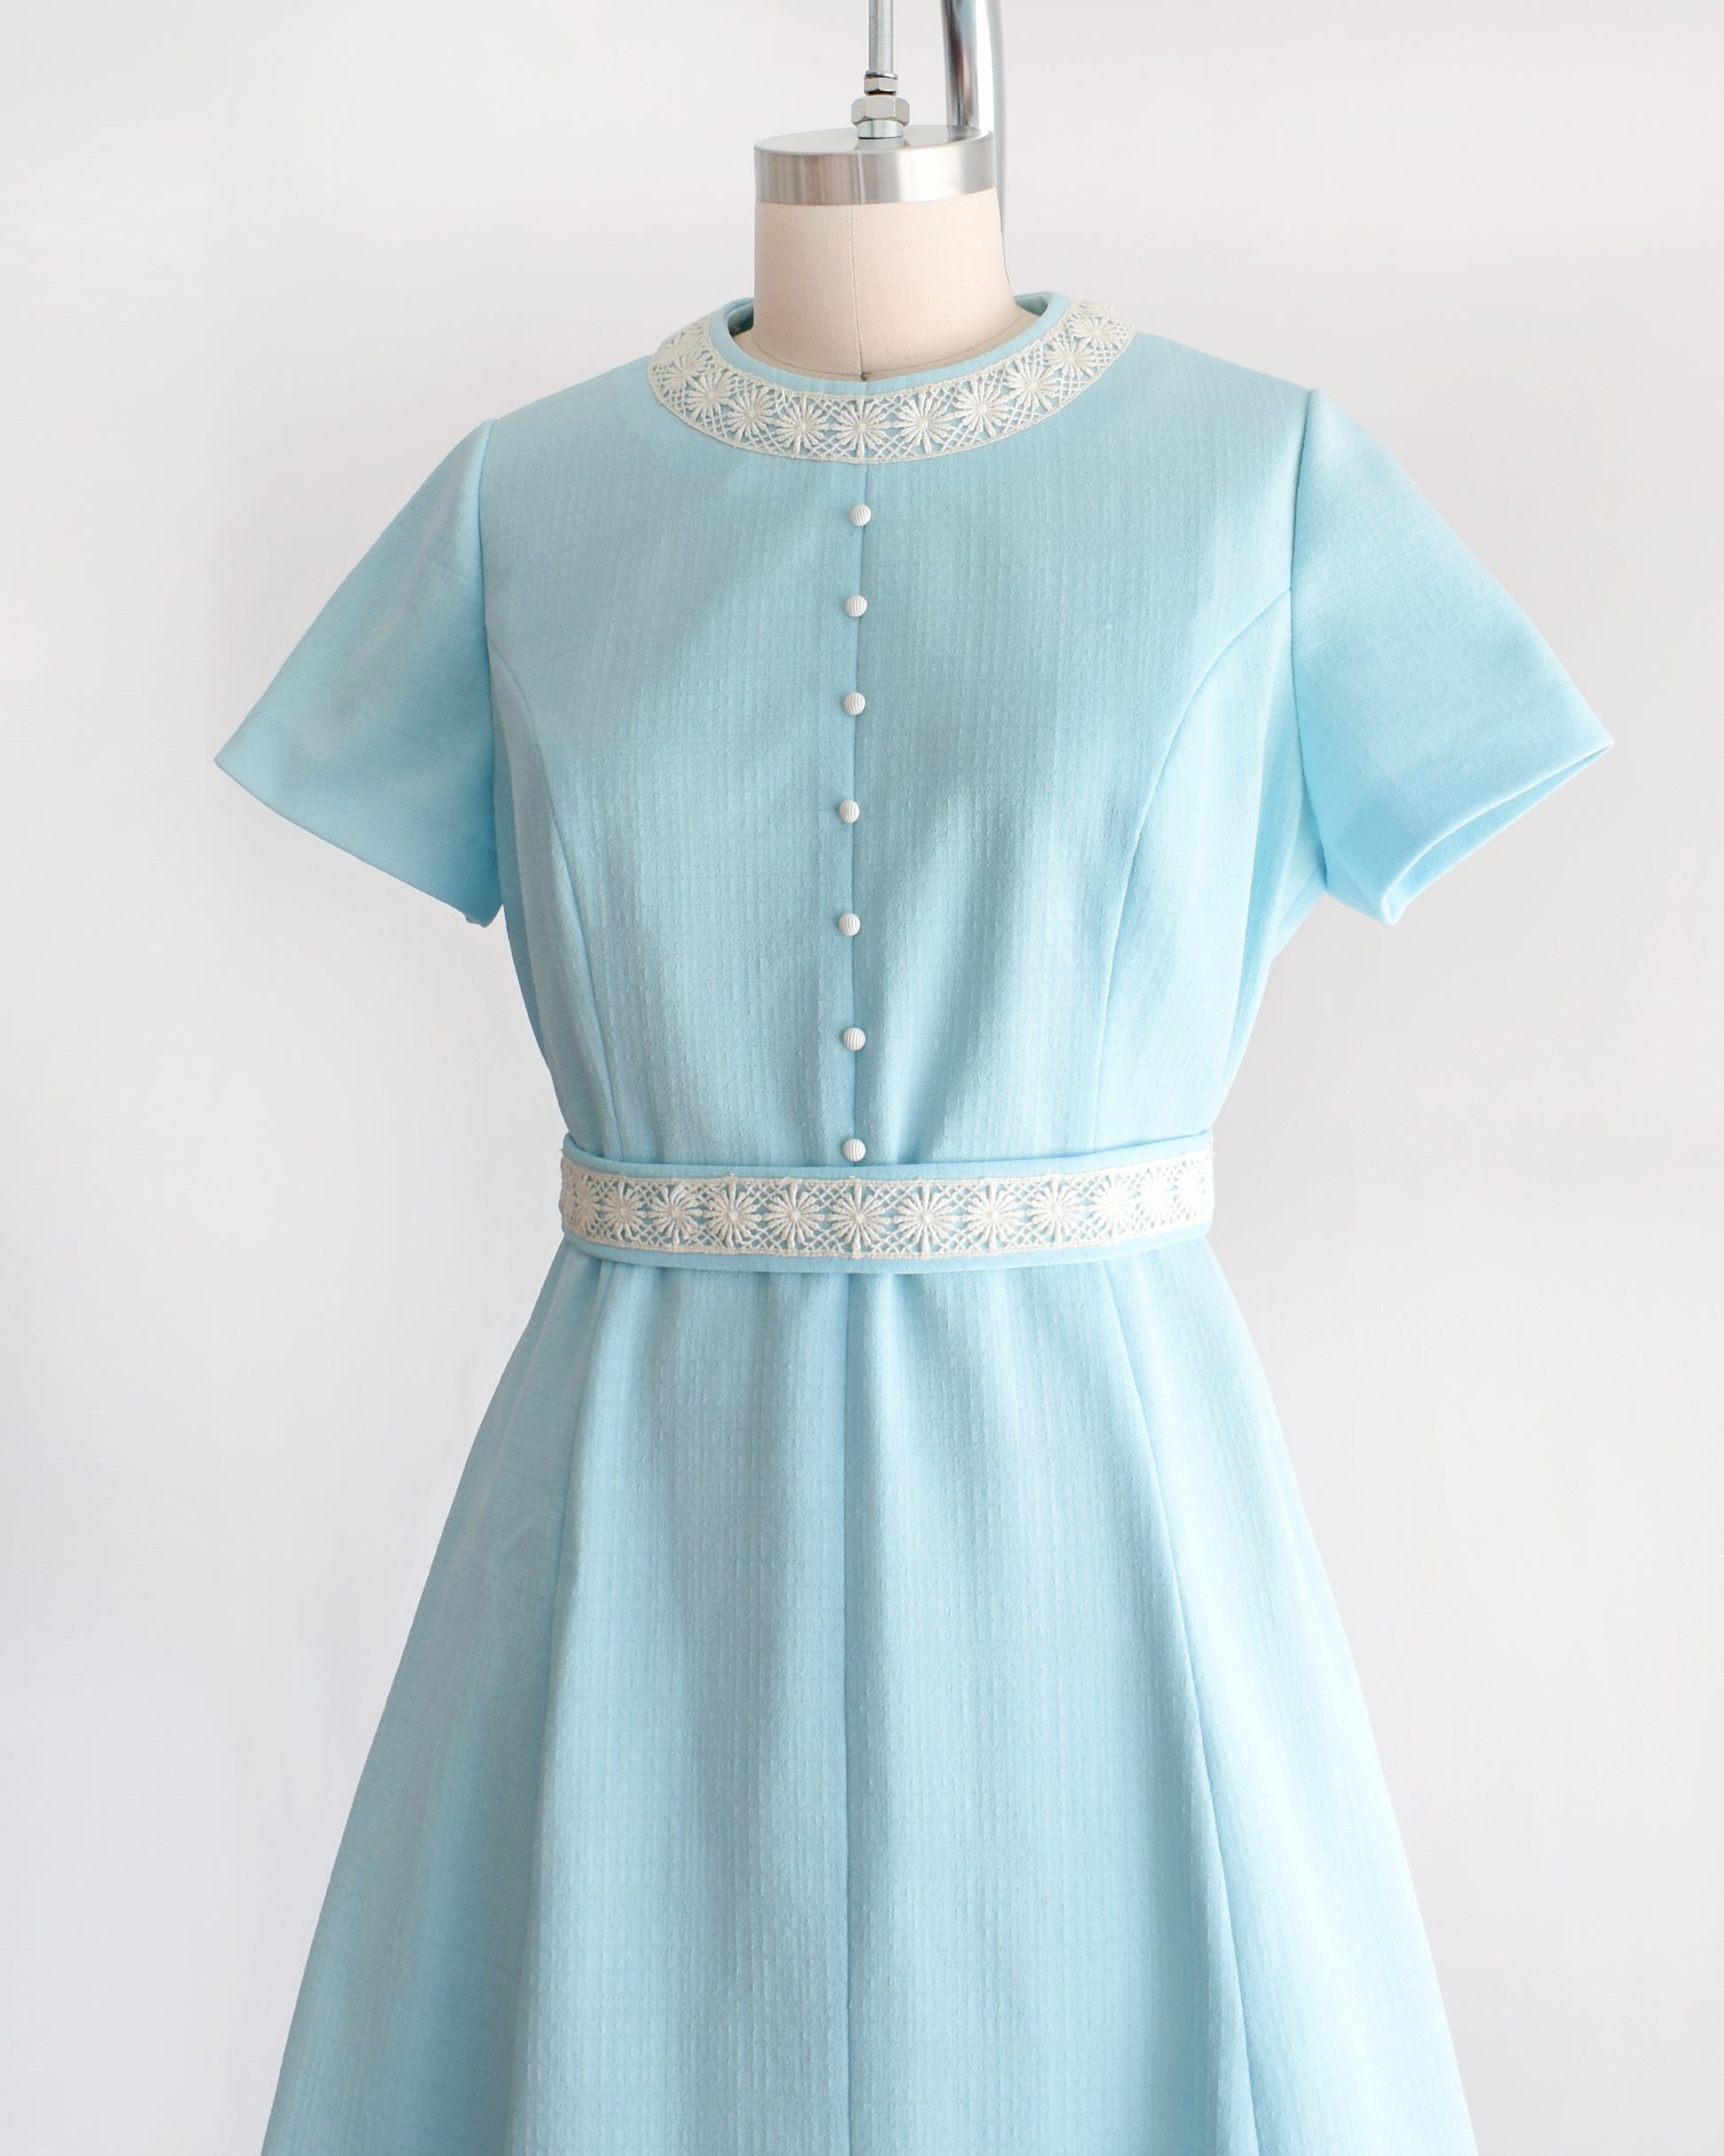 side front view of a late 1960s early 1970s vintage mod dress that is light blue and has cream floral lace trim around the collar, belt, and hem